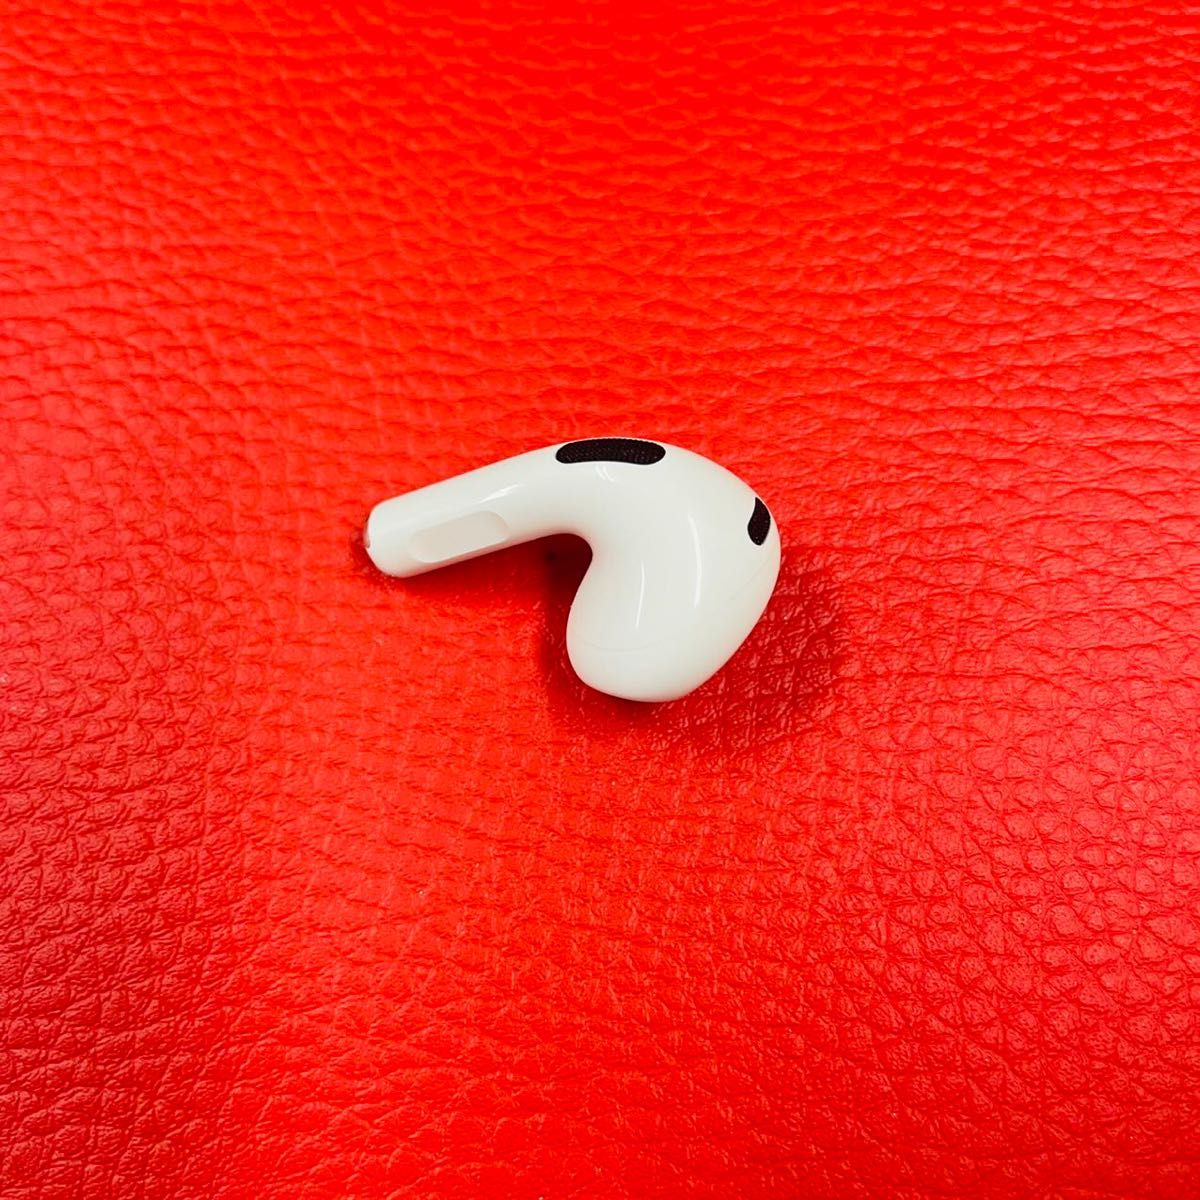 AirPods Apple 第3世代 右耳 R片耳 正規品 エアーポッズ｜PayPayフリマ